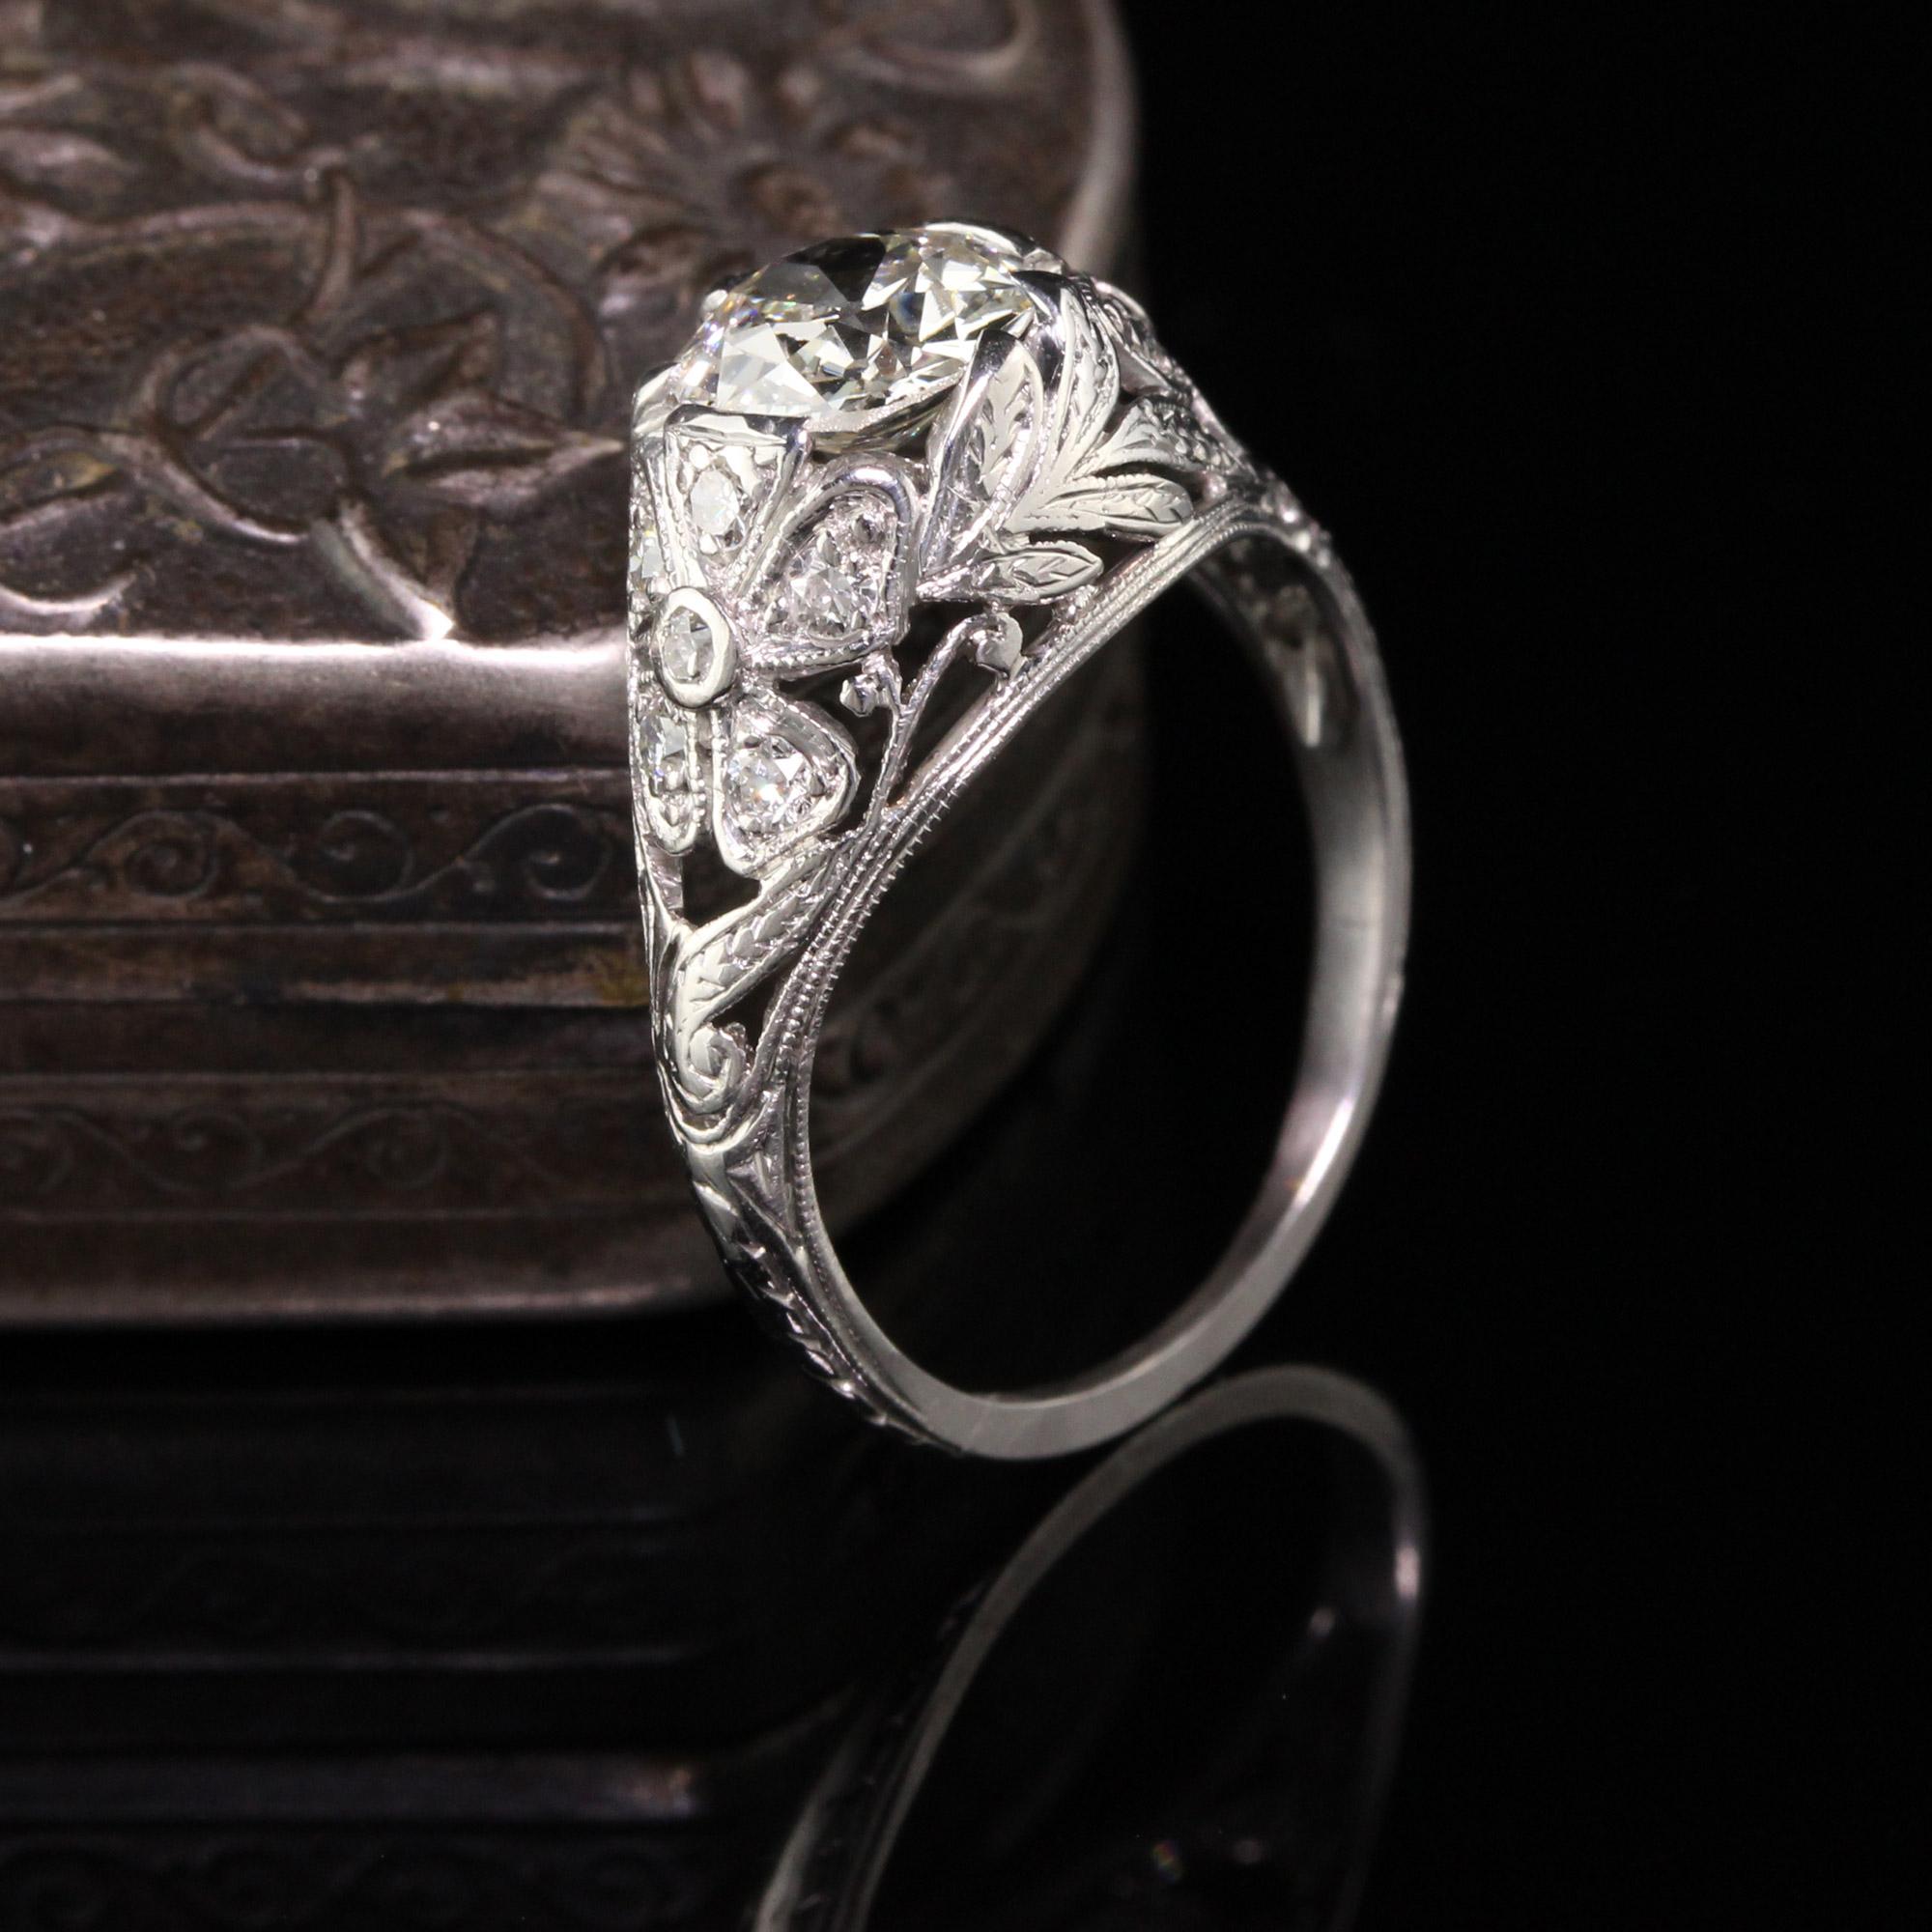 Gorgeous Antique Art Deco Platinum Old European Cut Diamond Floral Engagement Ring. This beautiful ring features a 1.06 ct Old European cut diamond in the center of a beautiful floral art deco mounting. The center is held by the petals of the